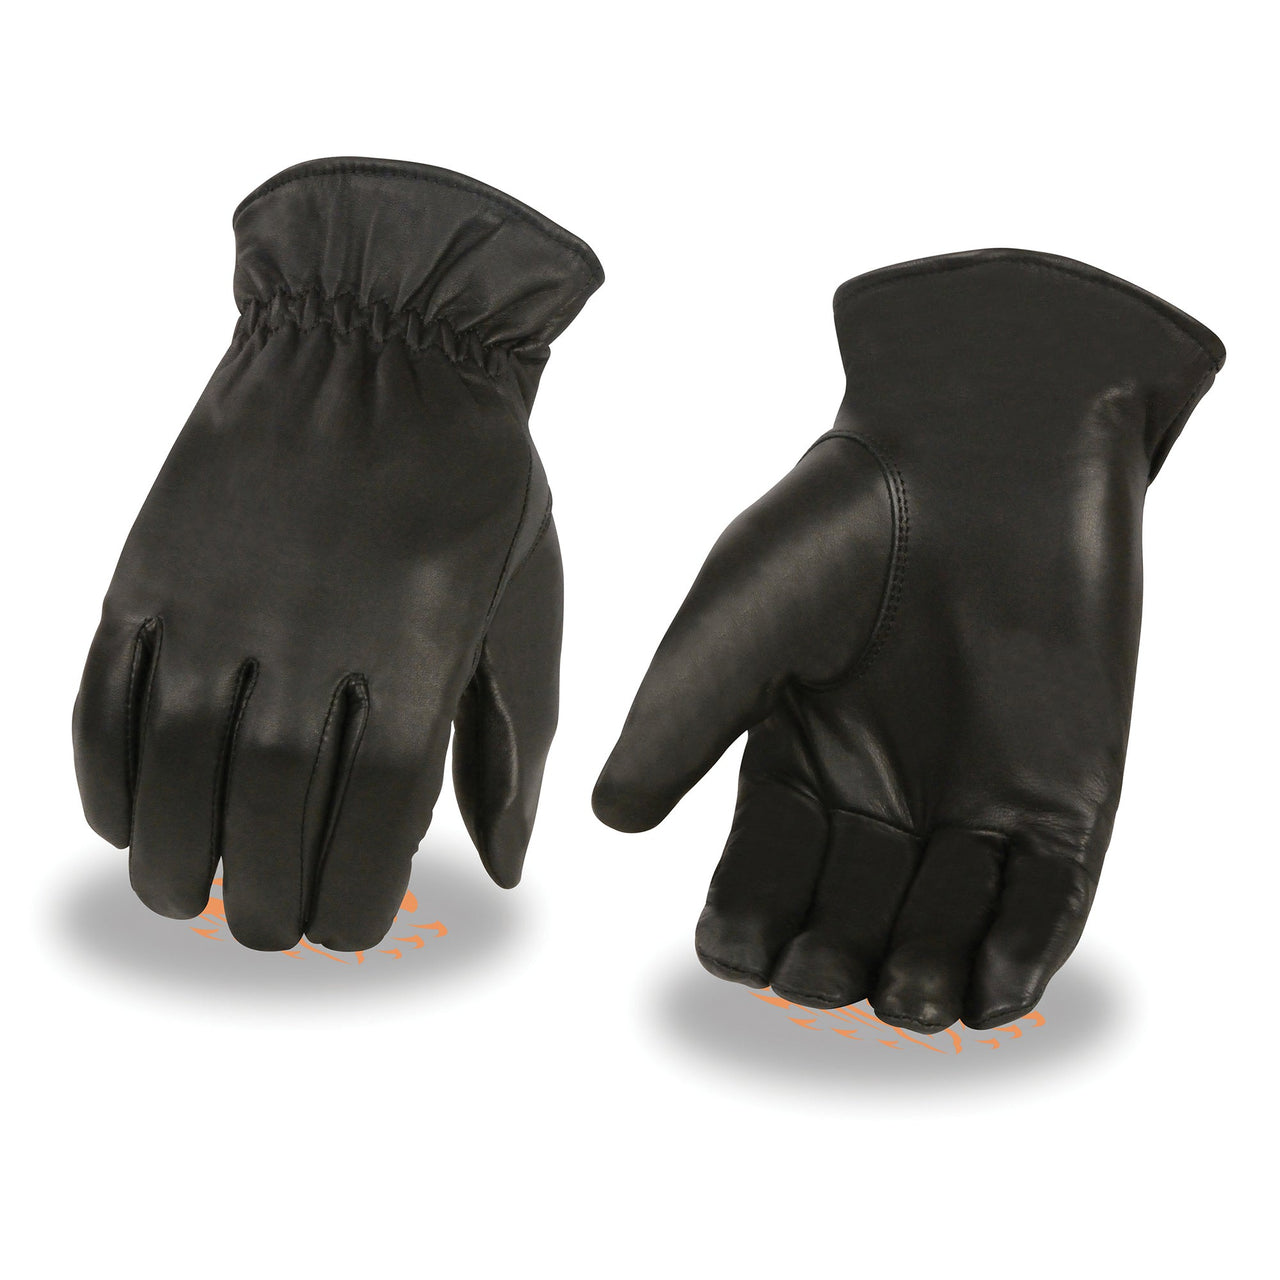 Men's Leather Thermal Lined Gloves w/ Cinch Wrist - HighwayLeather